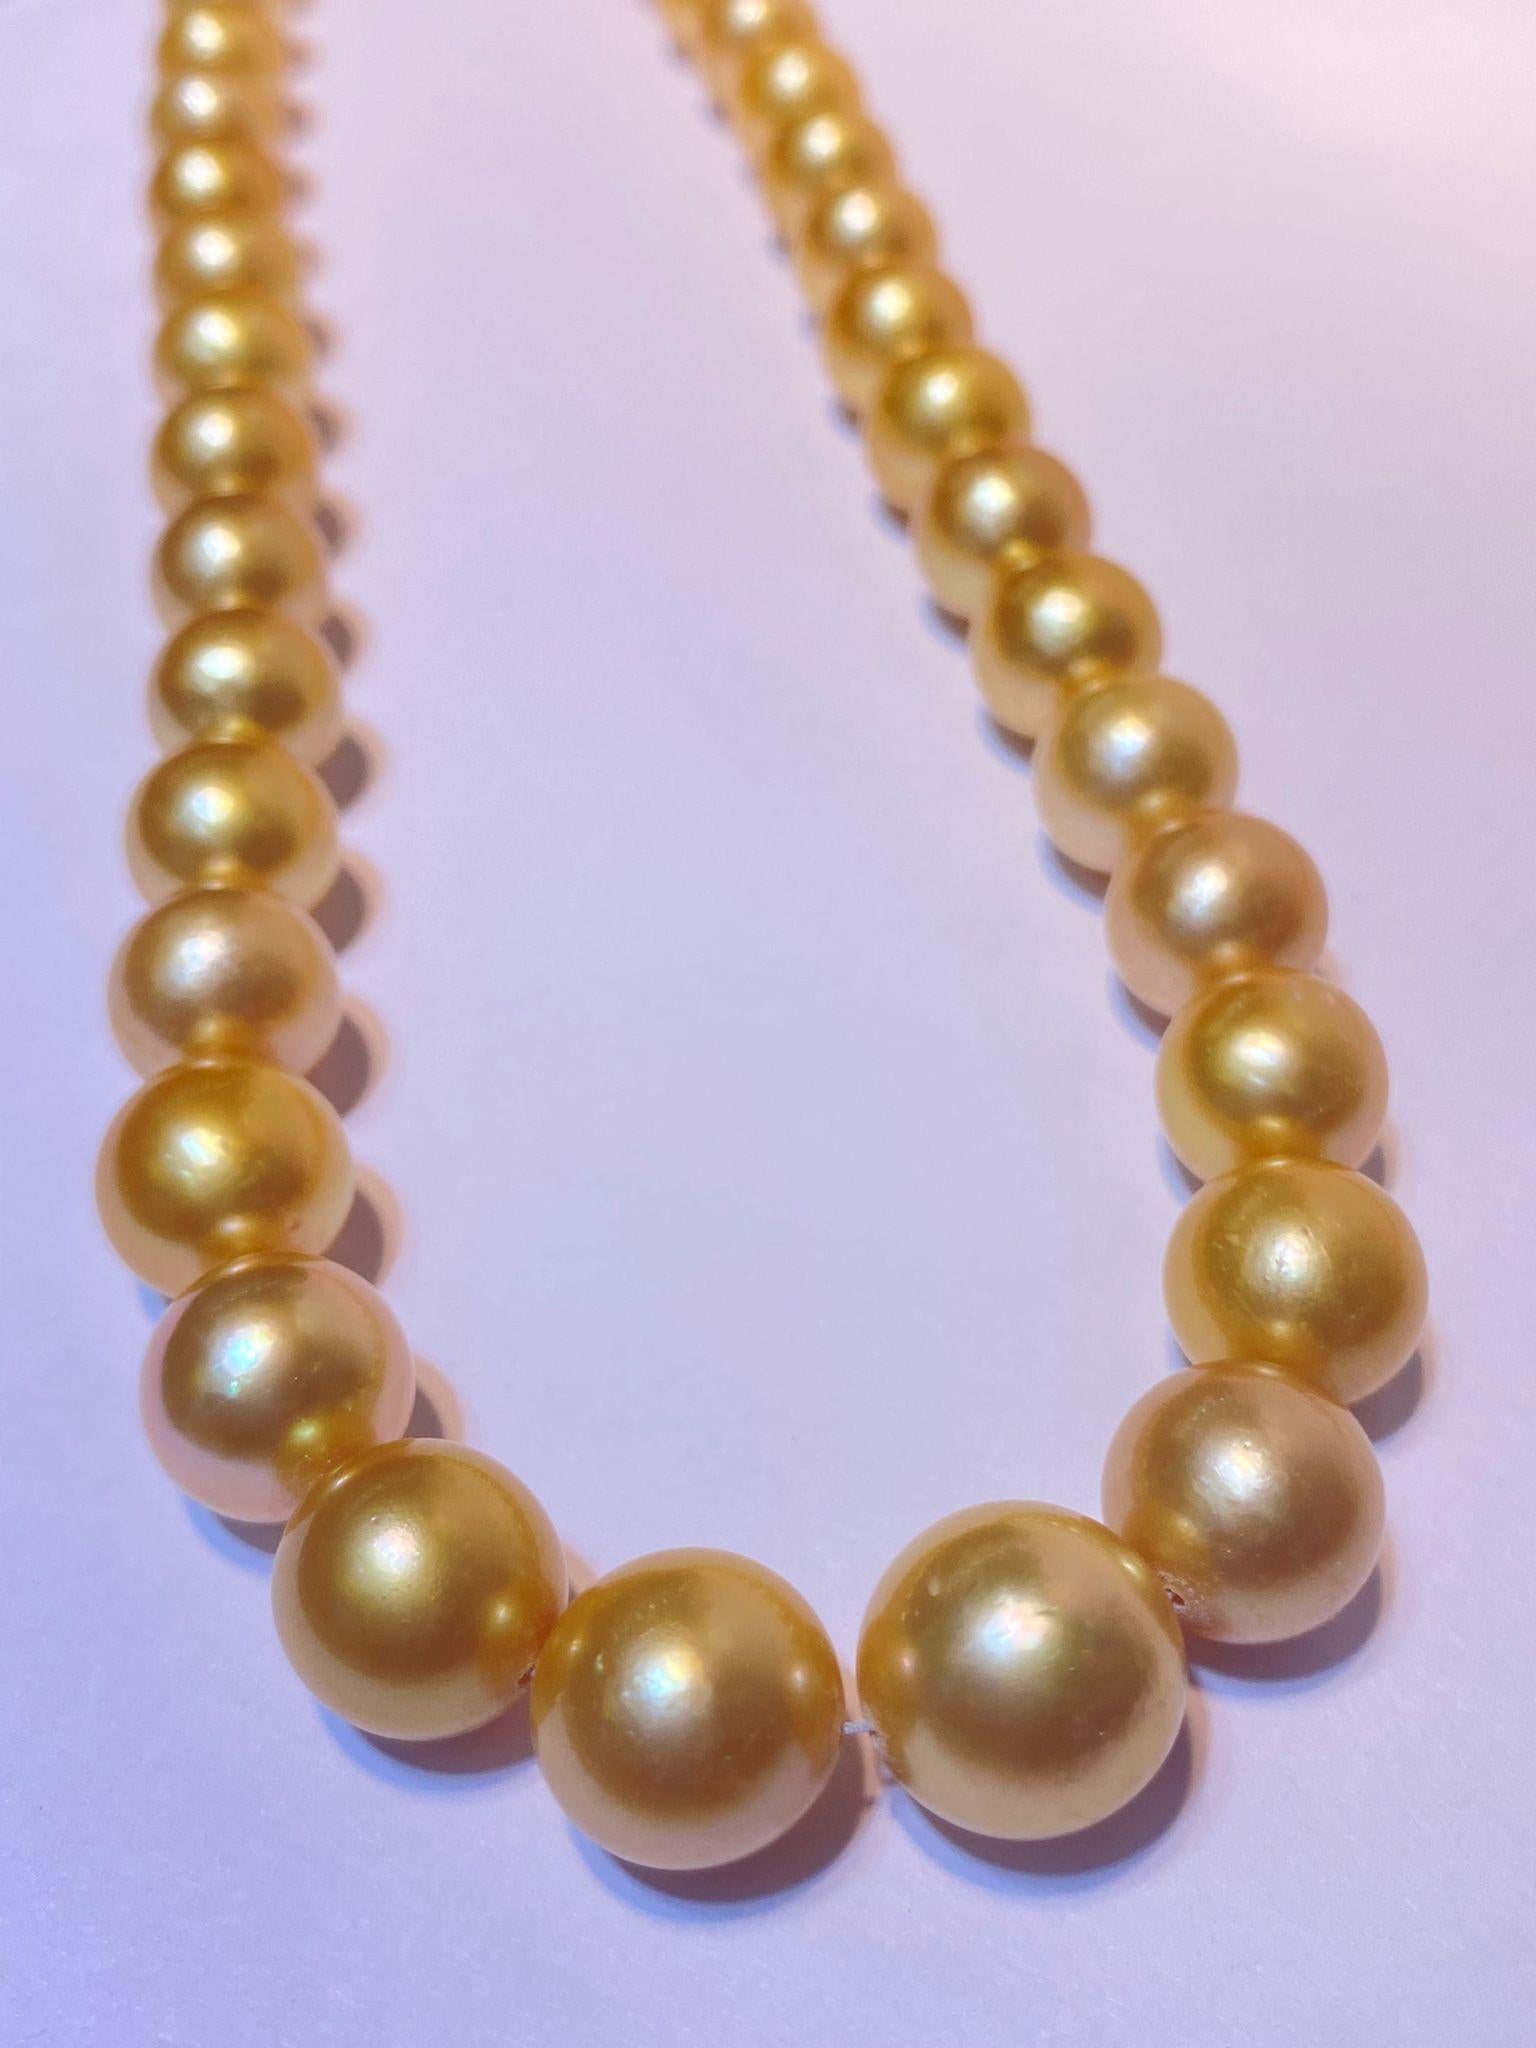 Round 10-12mm golden south sea pearl 37pcs 15.8inches will be more when strung #JS16
